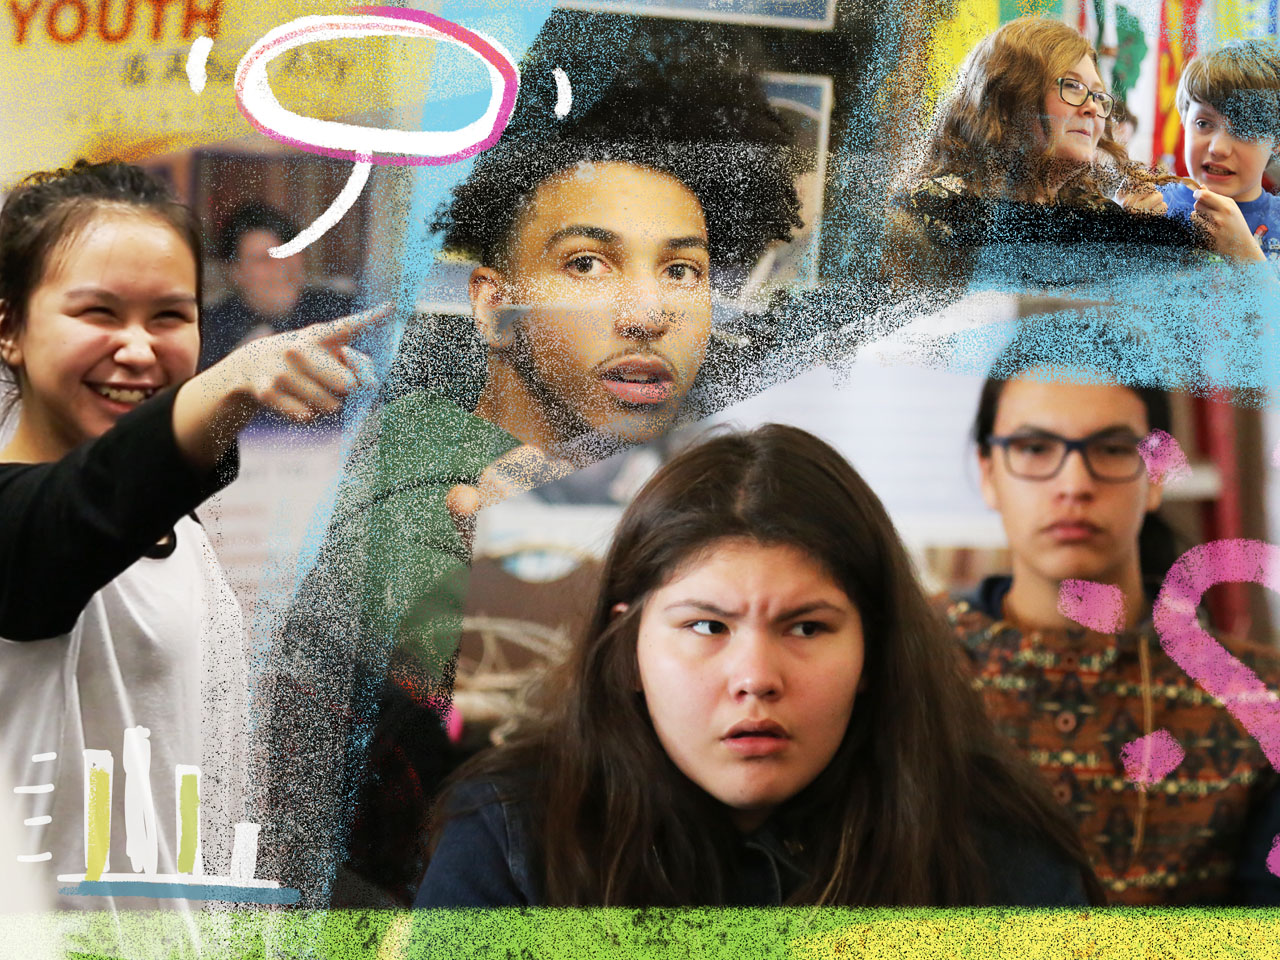 A photo montage of young people discussing things what interest them and connecting with each other socially.